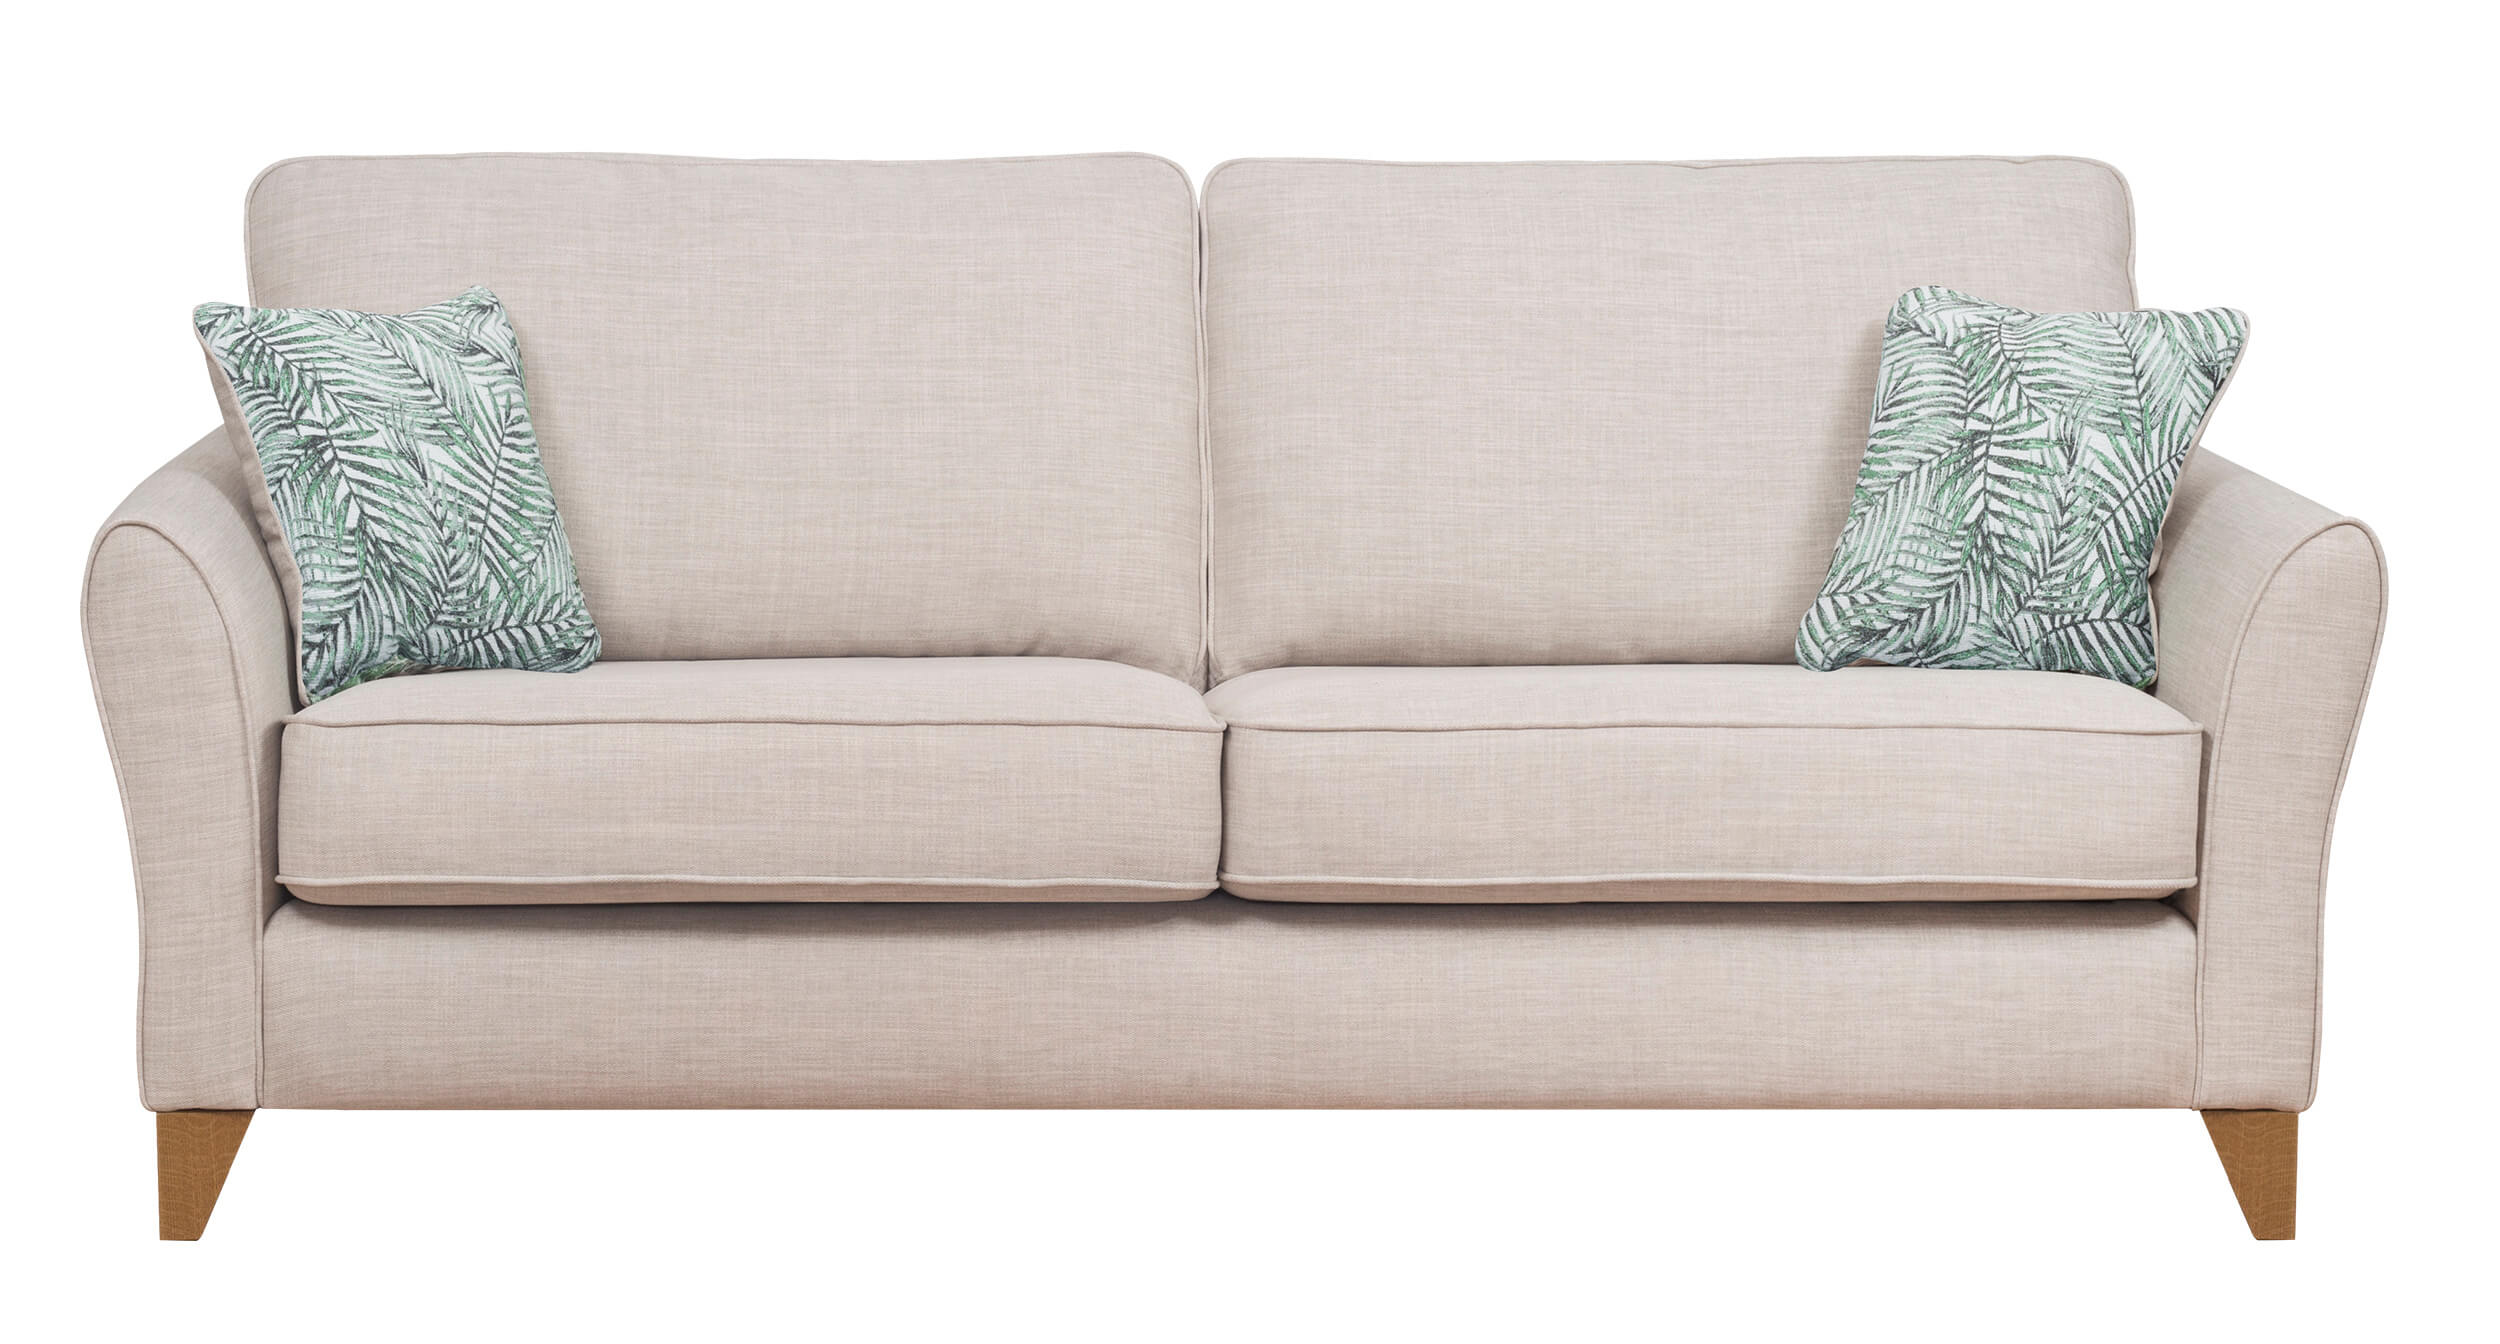 Showing image for Springfield 4-seater sofa